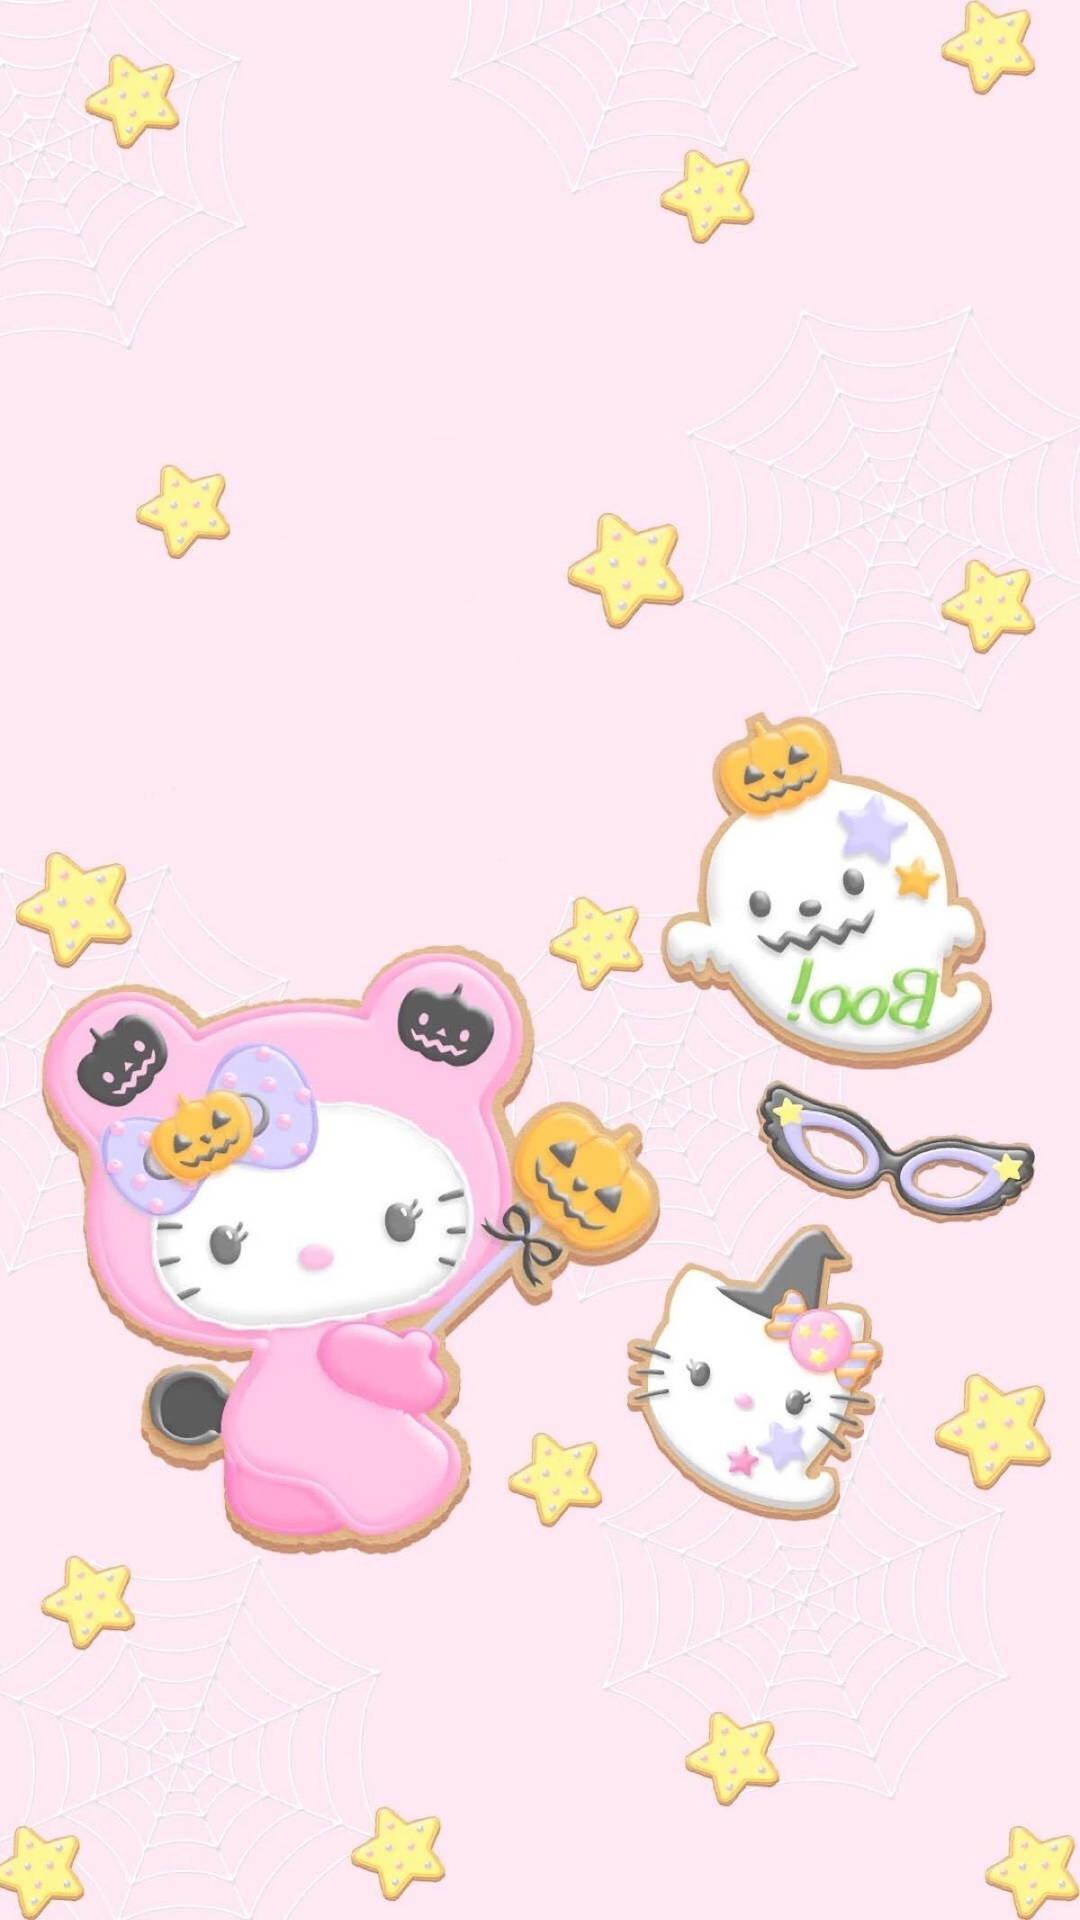 Spread Happiness and Joy with Cute Sanrio Characters! Wallpaper